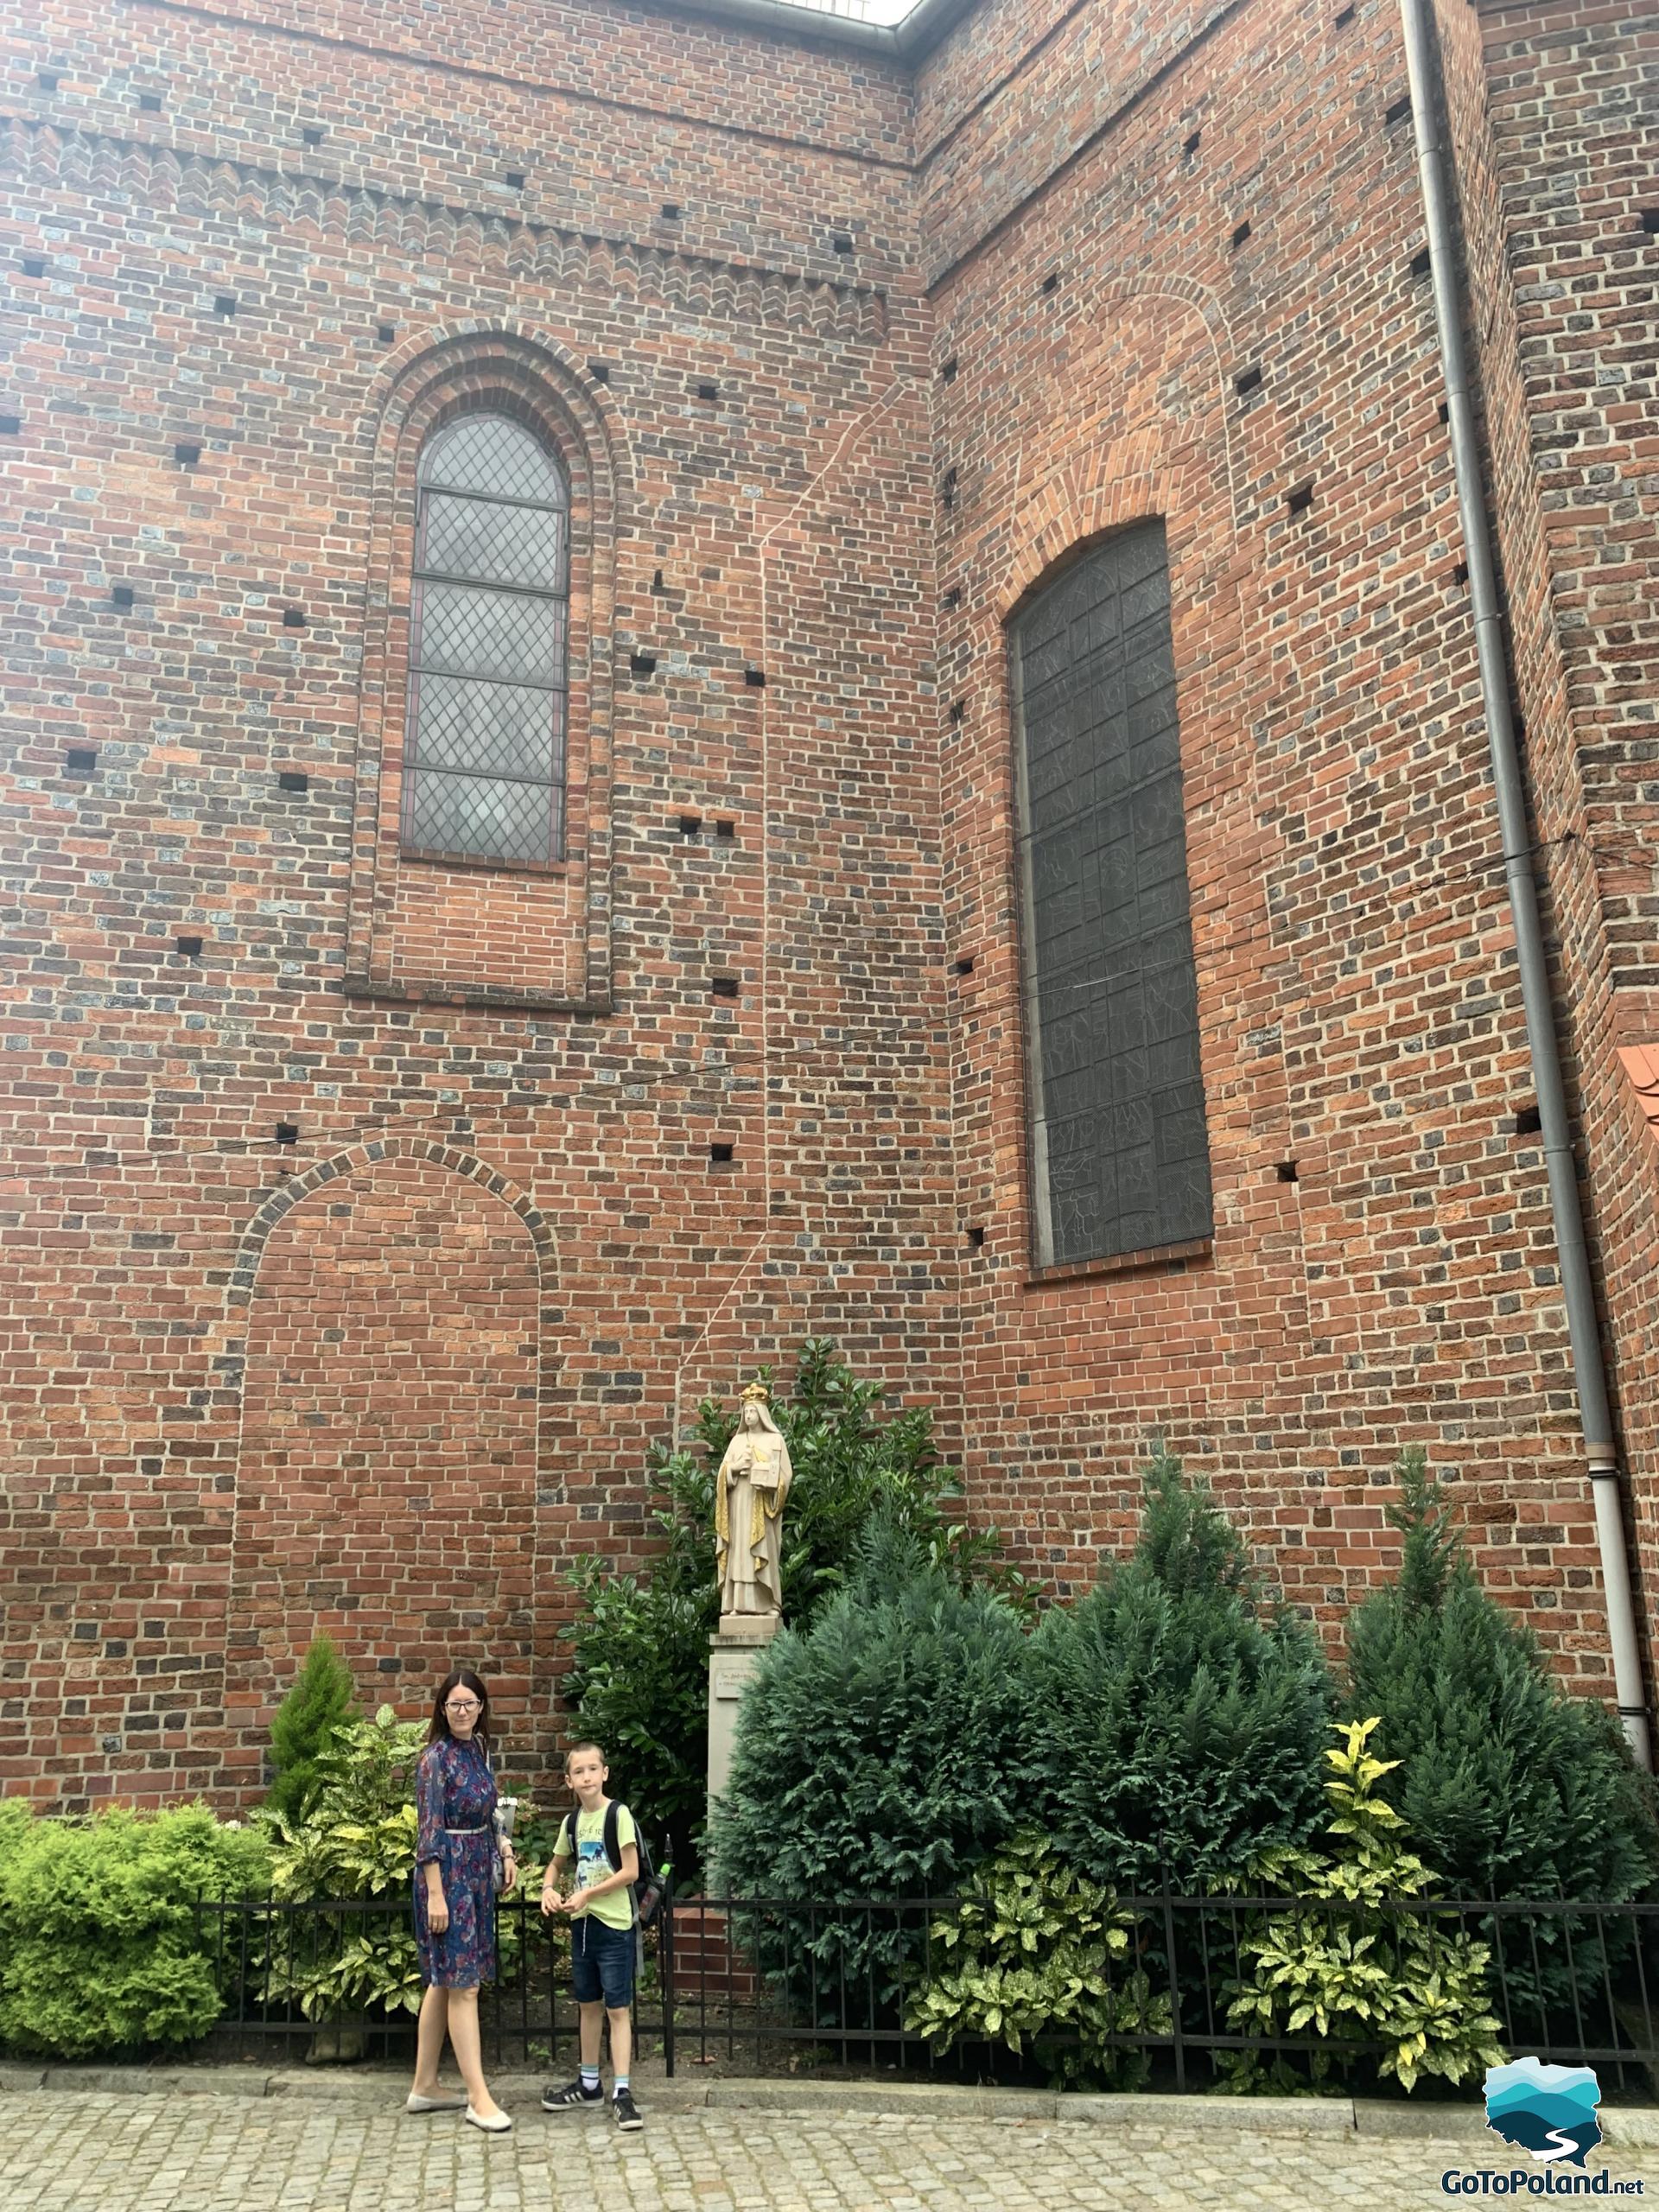 A woman and a boy in front of a brick church